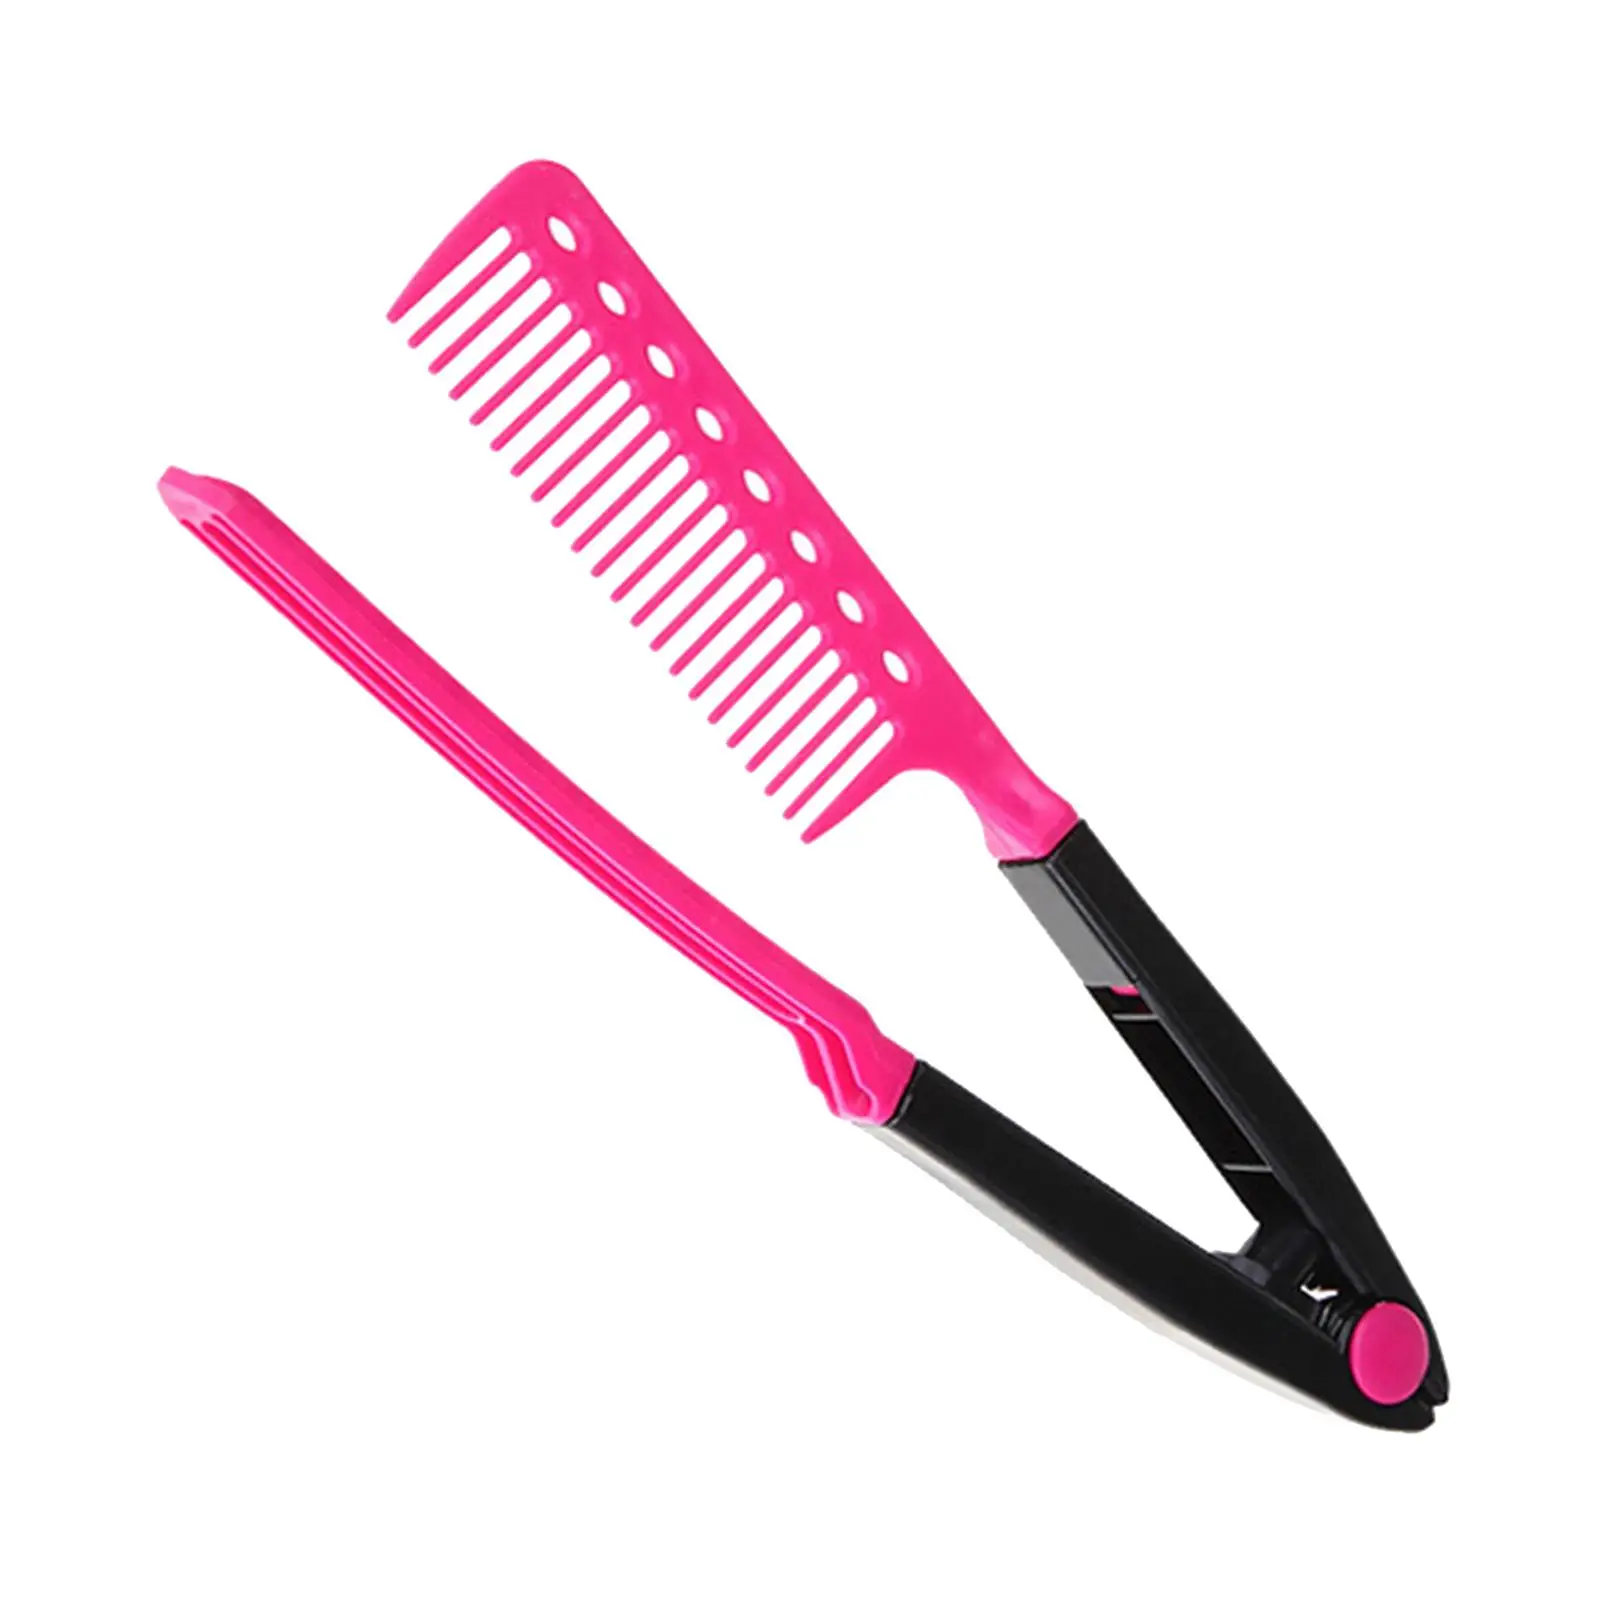 V Shaped Hair Straightener Comb Fashion with A Firm Grip Flat Iron Comb for Straight Hair